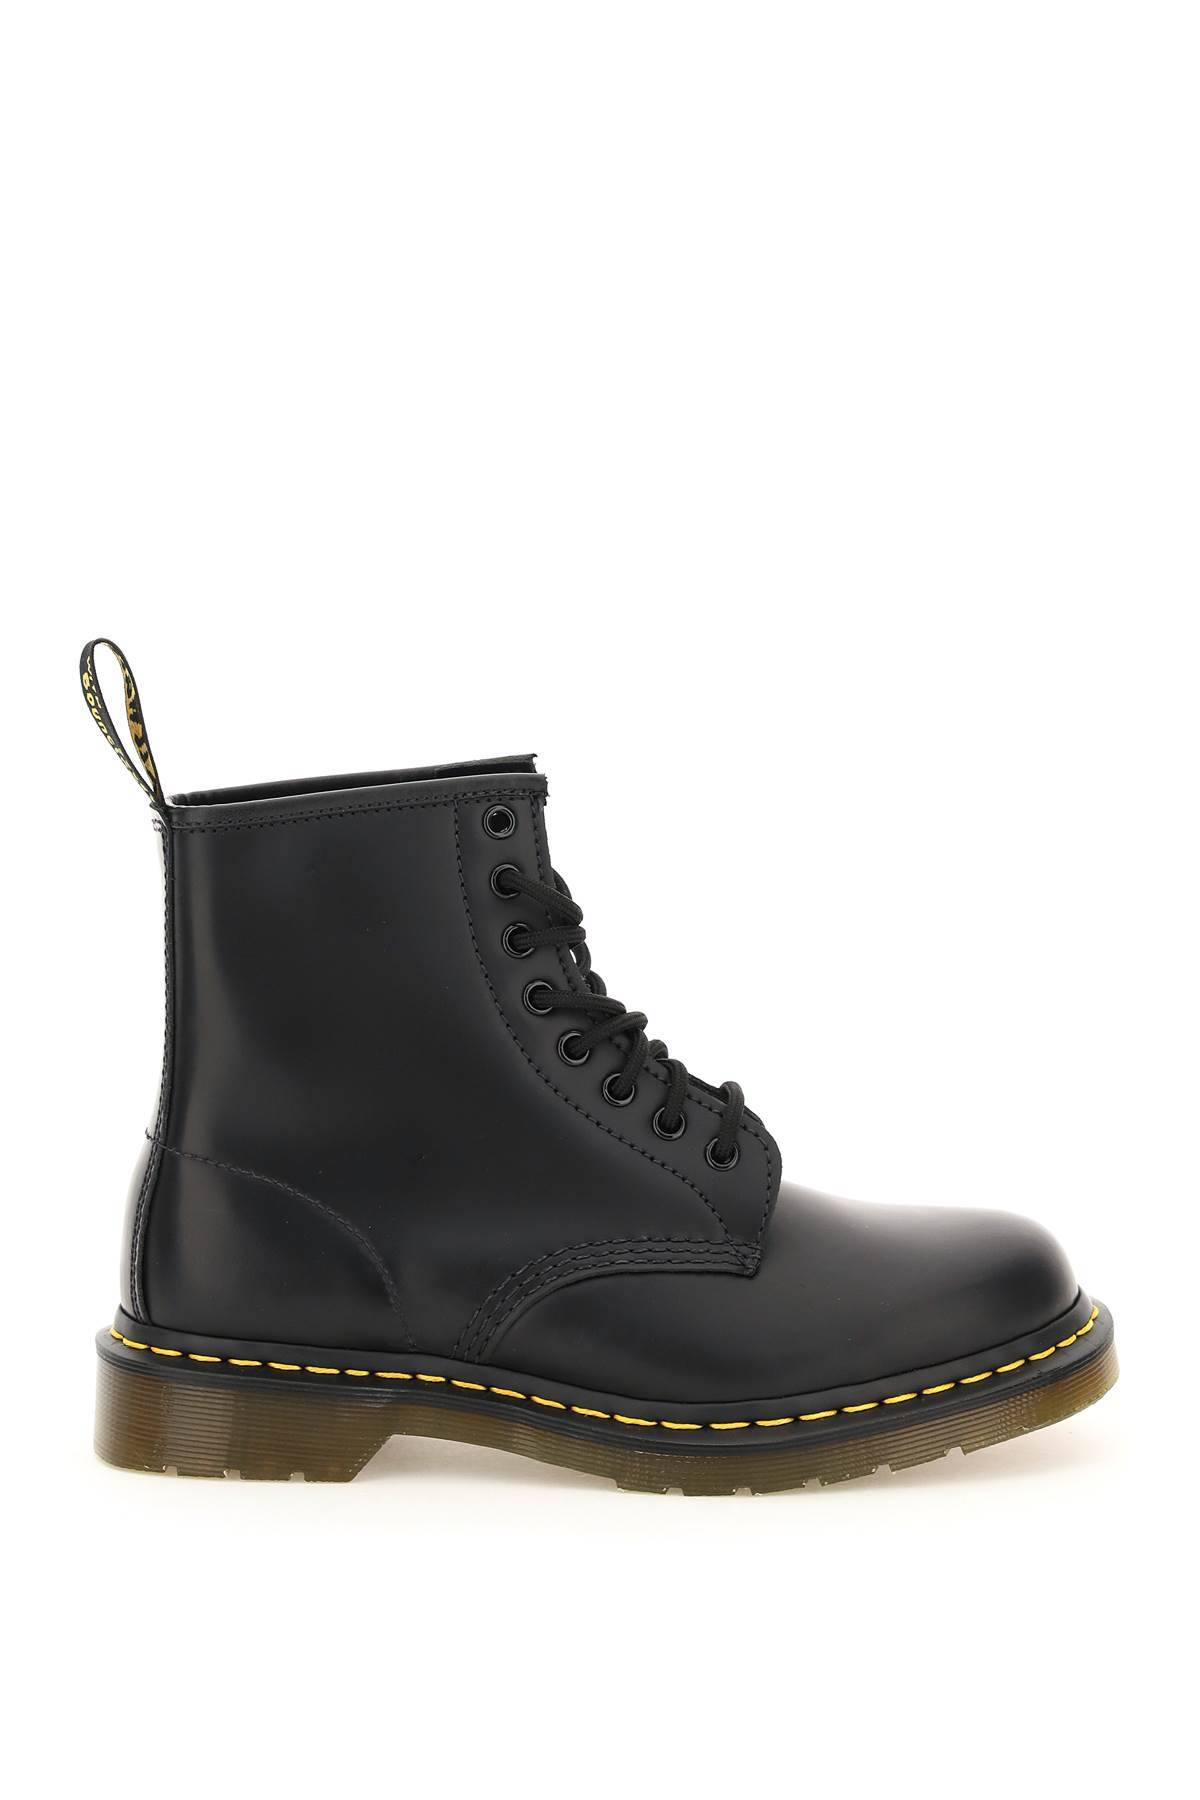 DR.MARTENS DR. MARTENS 1460 smooth leather combat boots